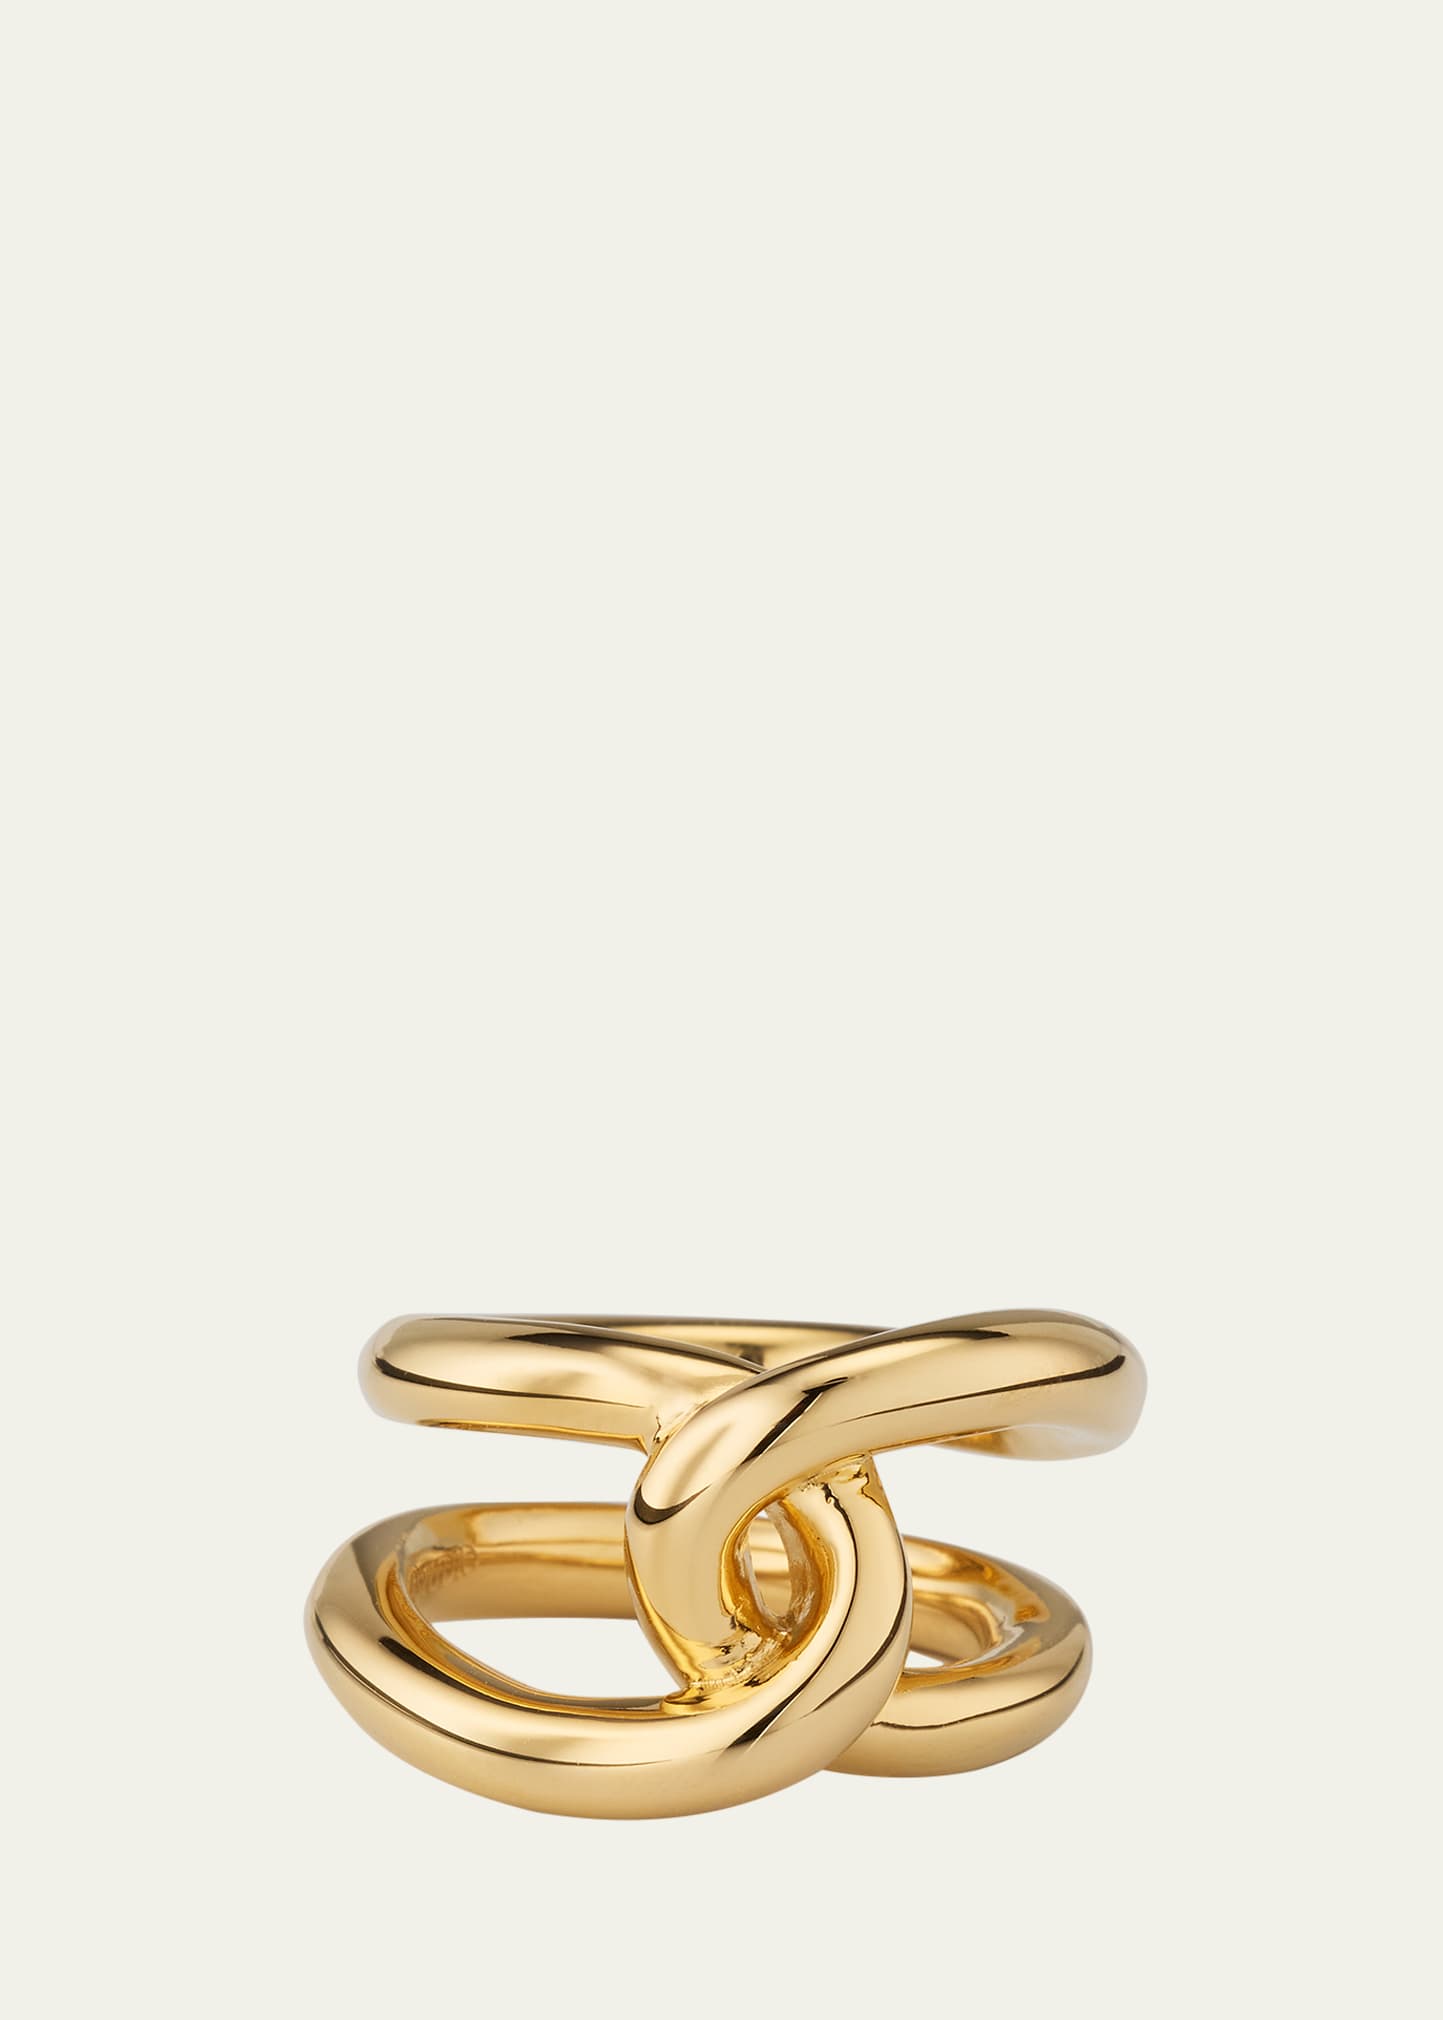 Lie Studio The Agnes Sterling Silver Knot-tie Ring In Yg